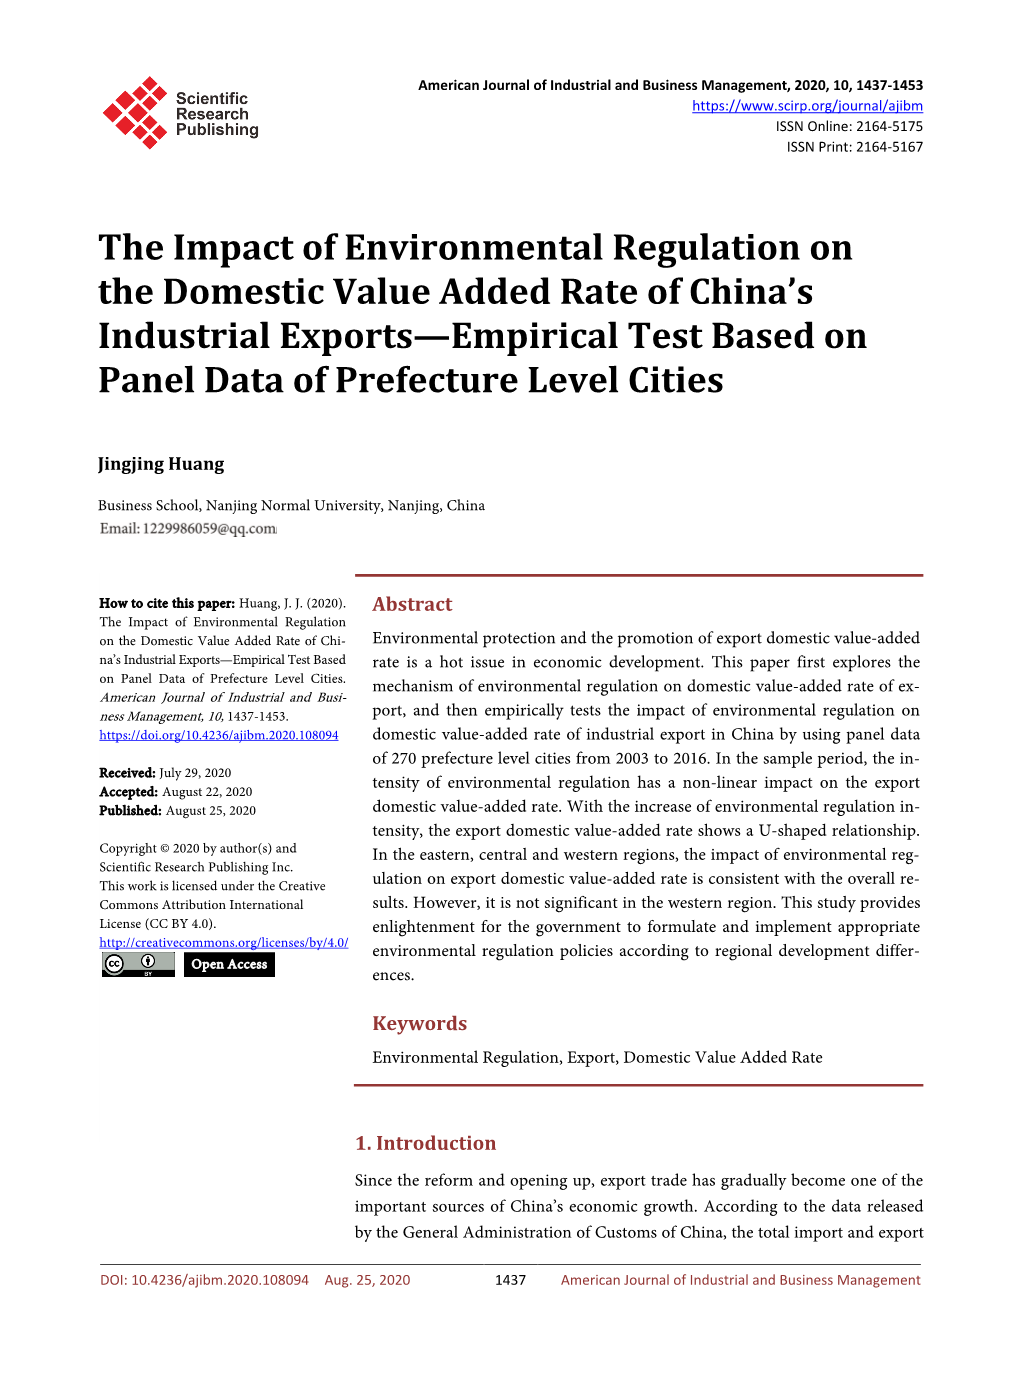 The Impact of Environmental Regulation on the Domestic Value Added Rate of China’S Industrial Exports—Empirical Test Based on Panel Data of Prefecture Level Cities